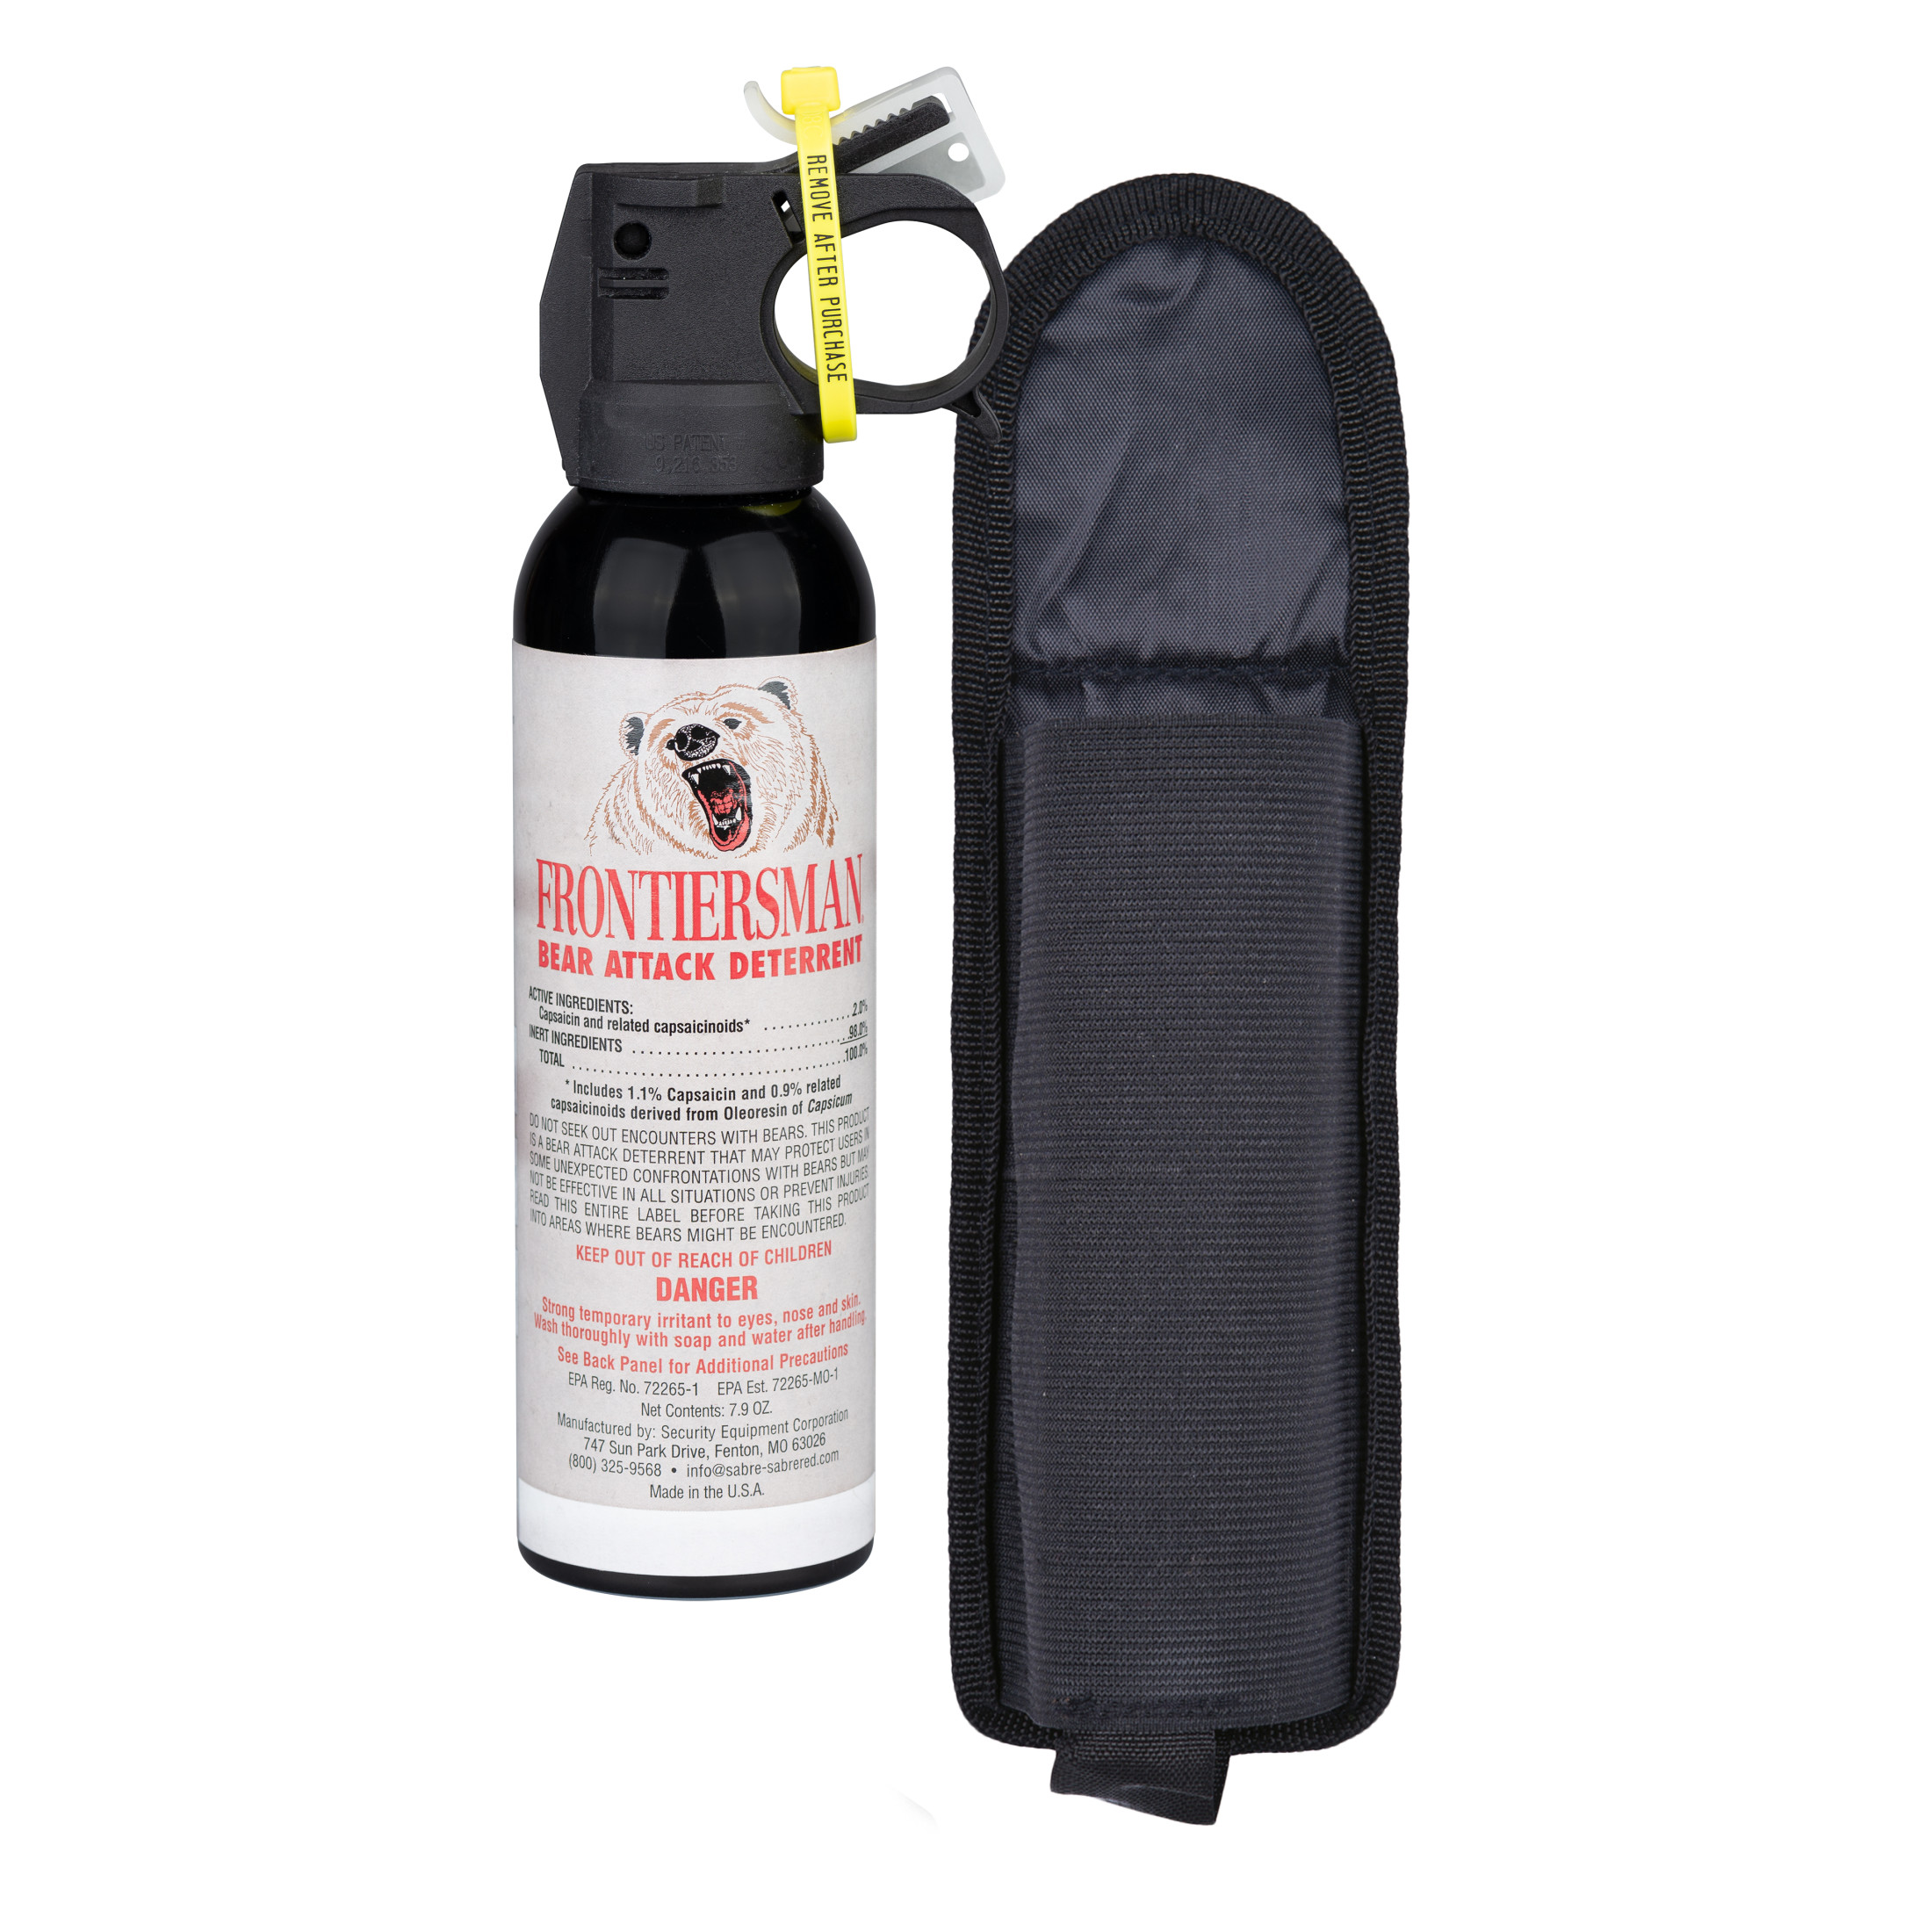 SABRE Frontiersman 7.9 oz. Bear Spray Deterrent with Belt Holster, White, 8.5 in. - image 1 of 12